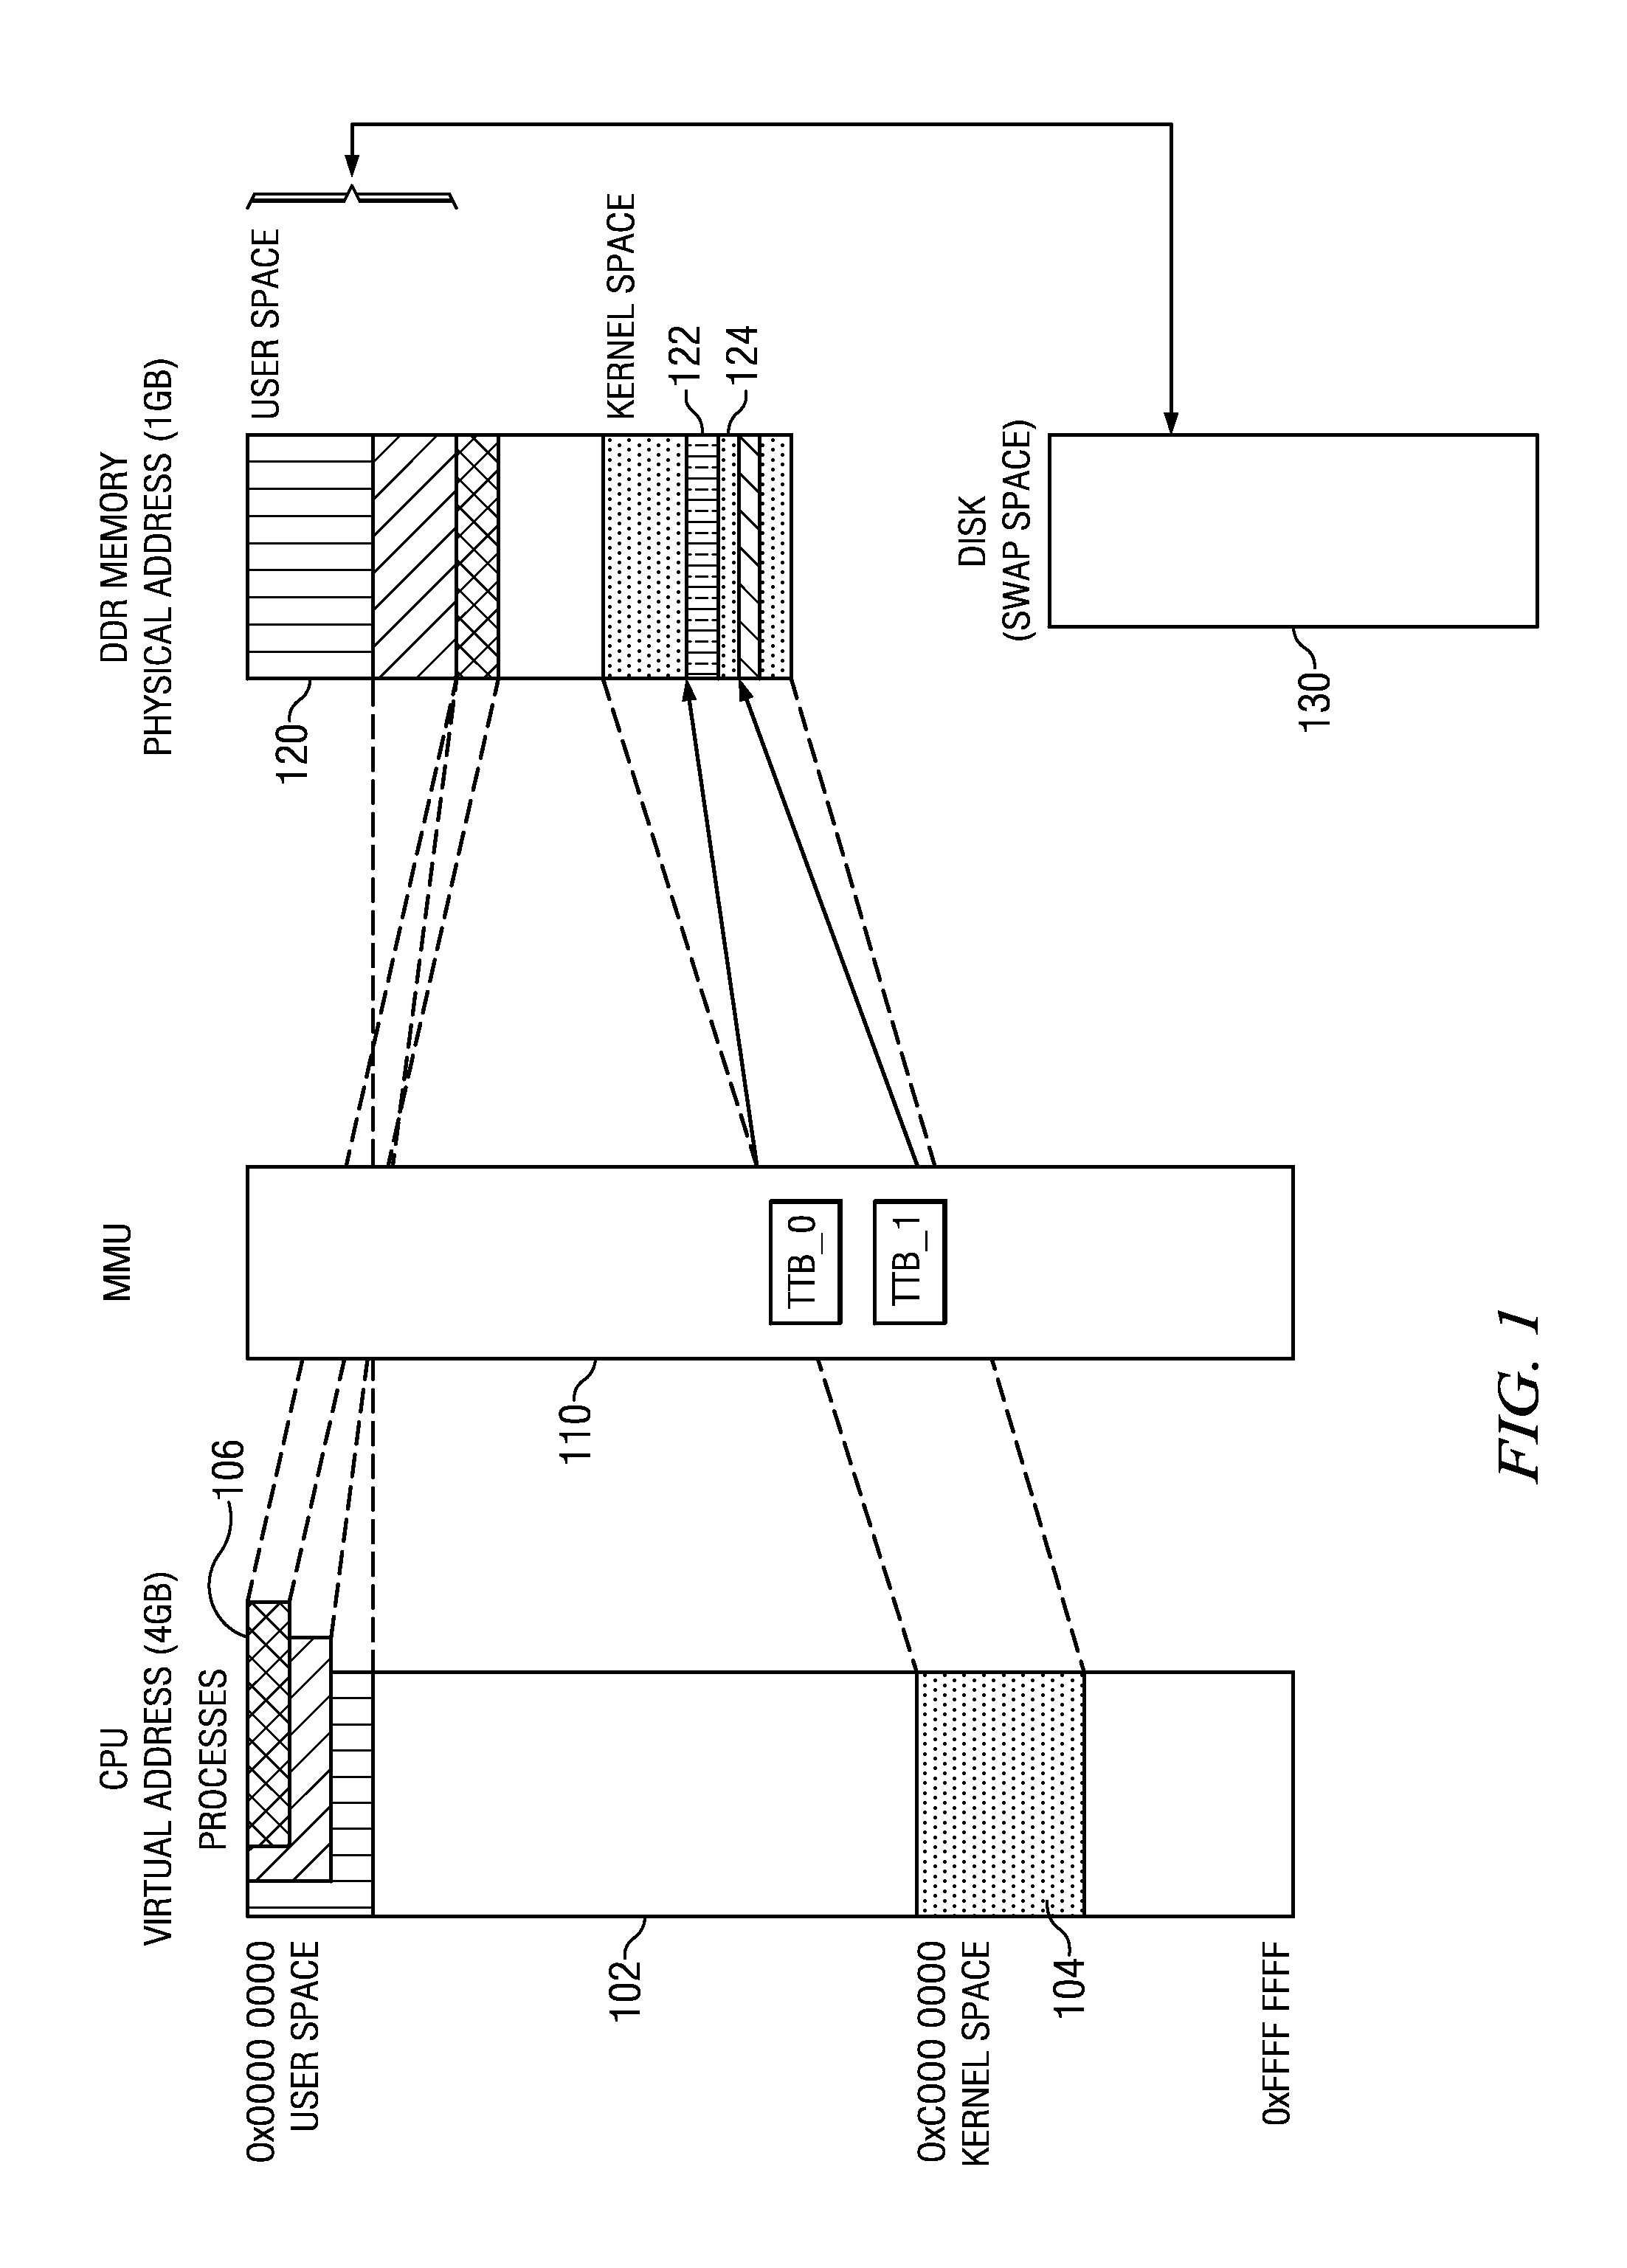 Dynamically Configurable Memory System